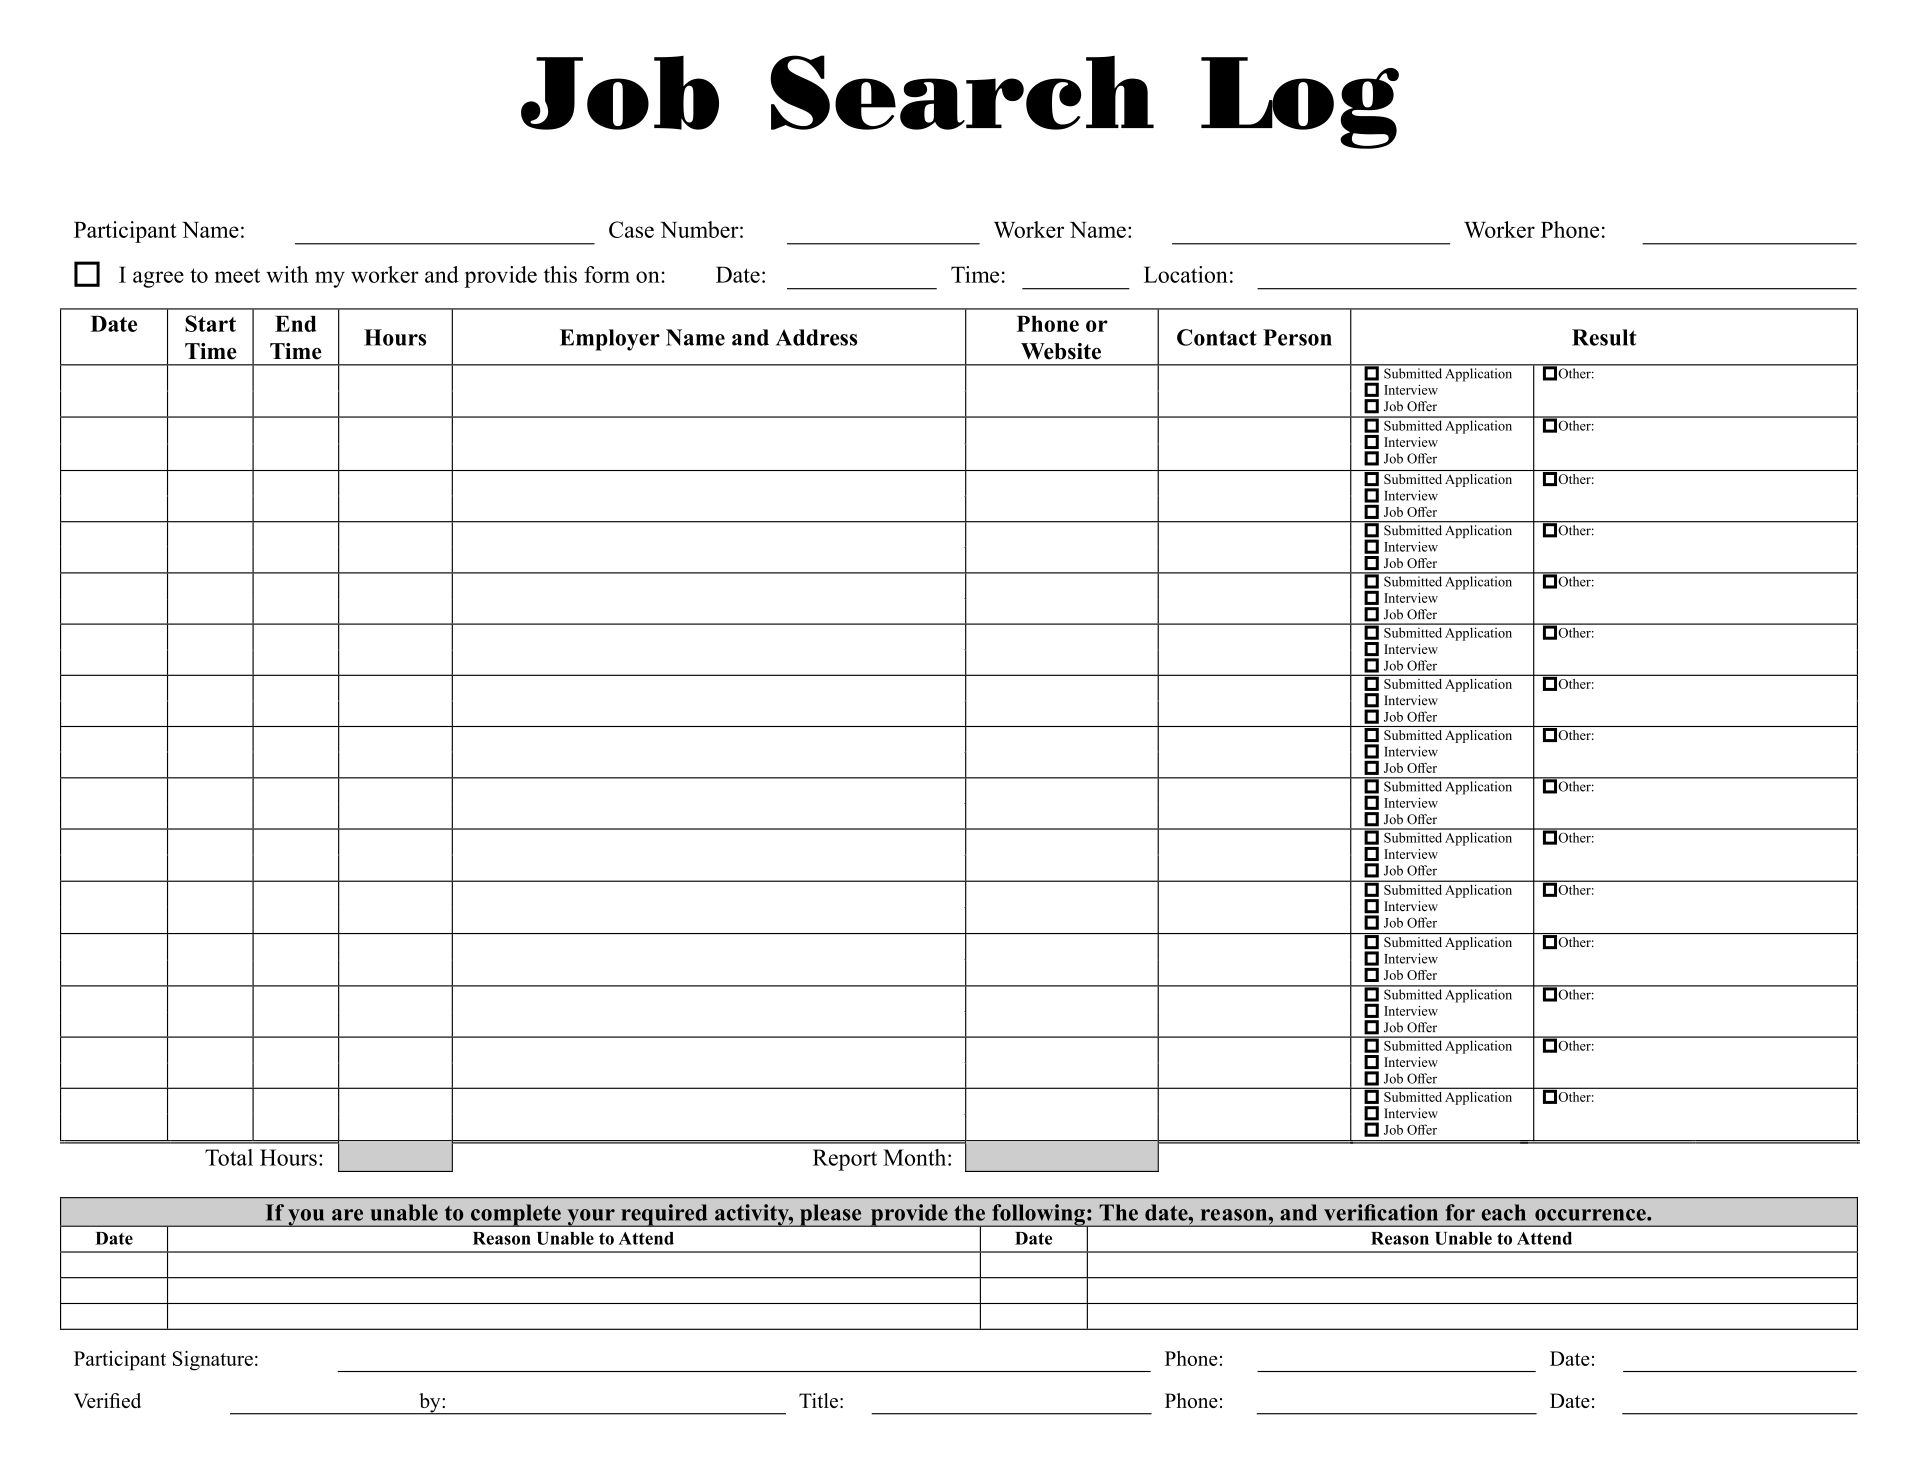 6-best-images-of-job-search-log-template-printable-job-search-log-template-job-search-log